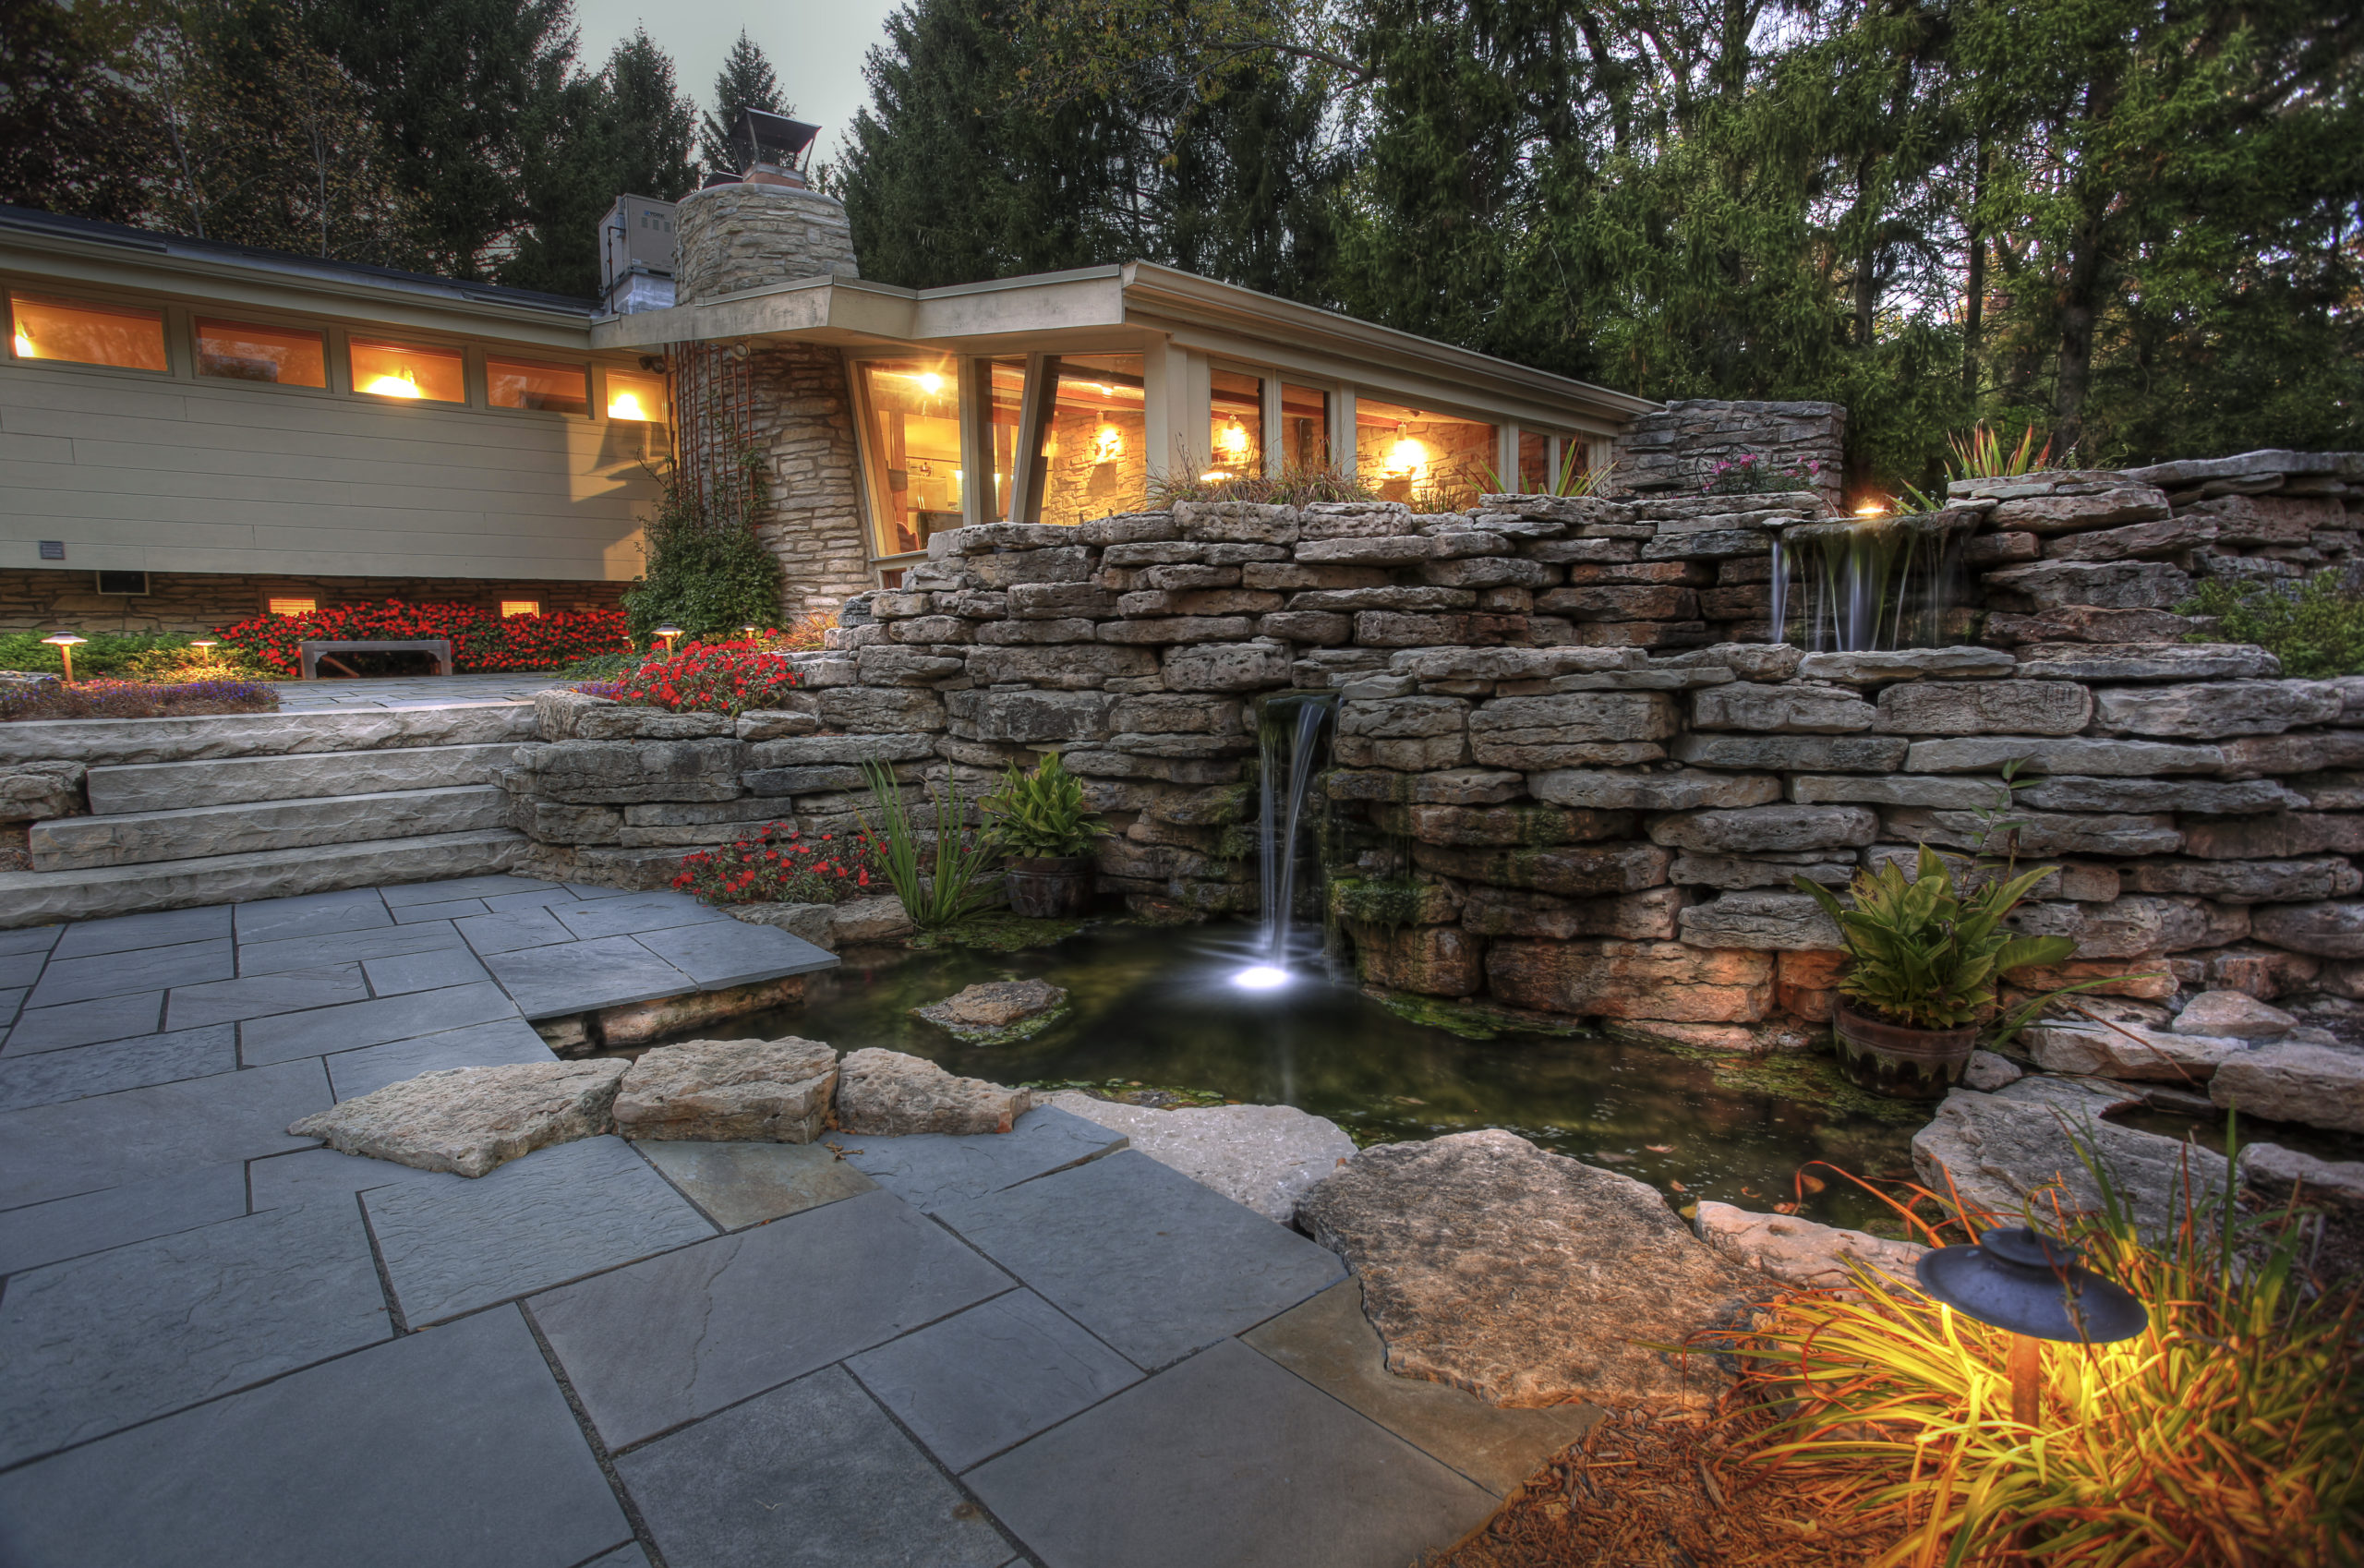 Landscape project in Mequon including patio, steps, water feature (pond, waterfall and stream) and landscape lighting.